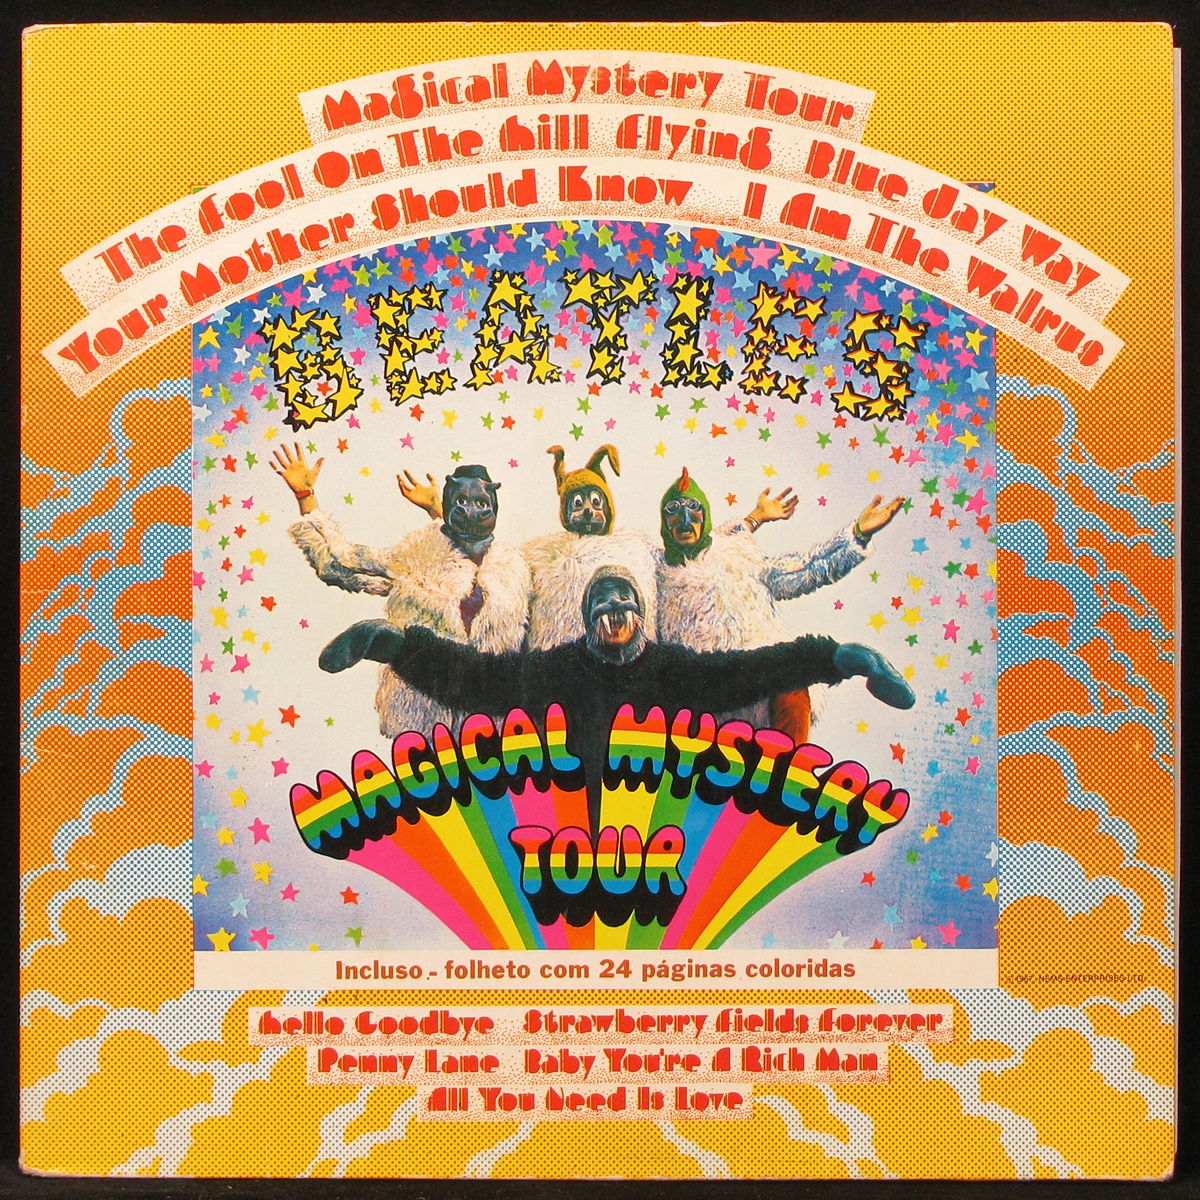 LP Beatles — Magical Mystery Tour (+ book) фото